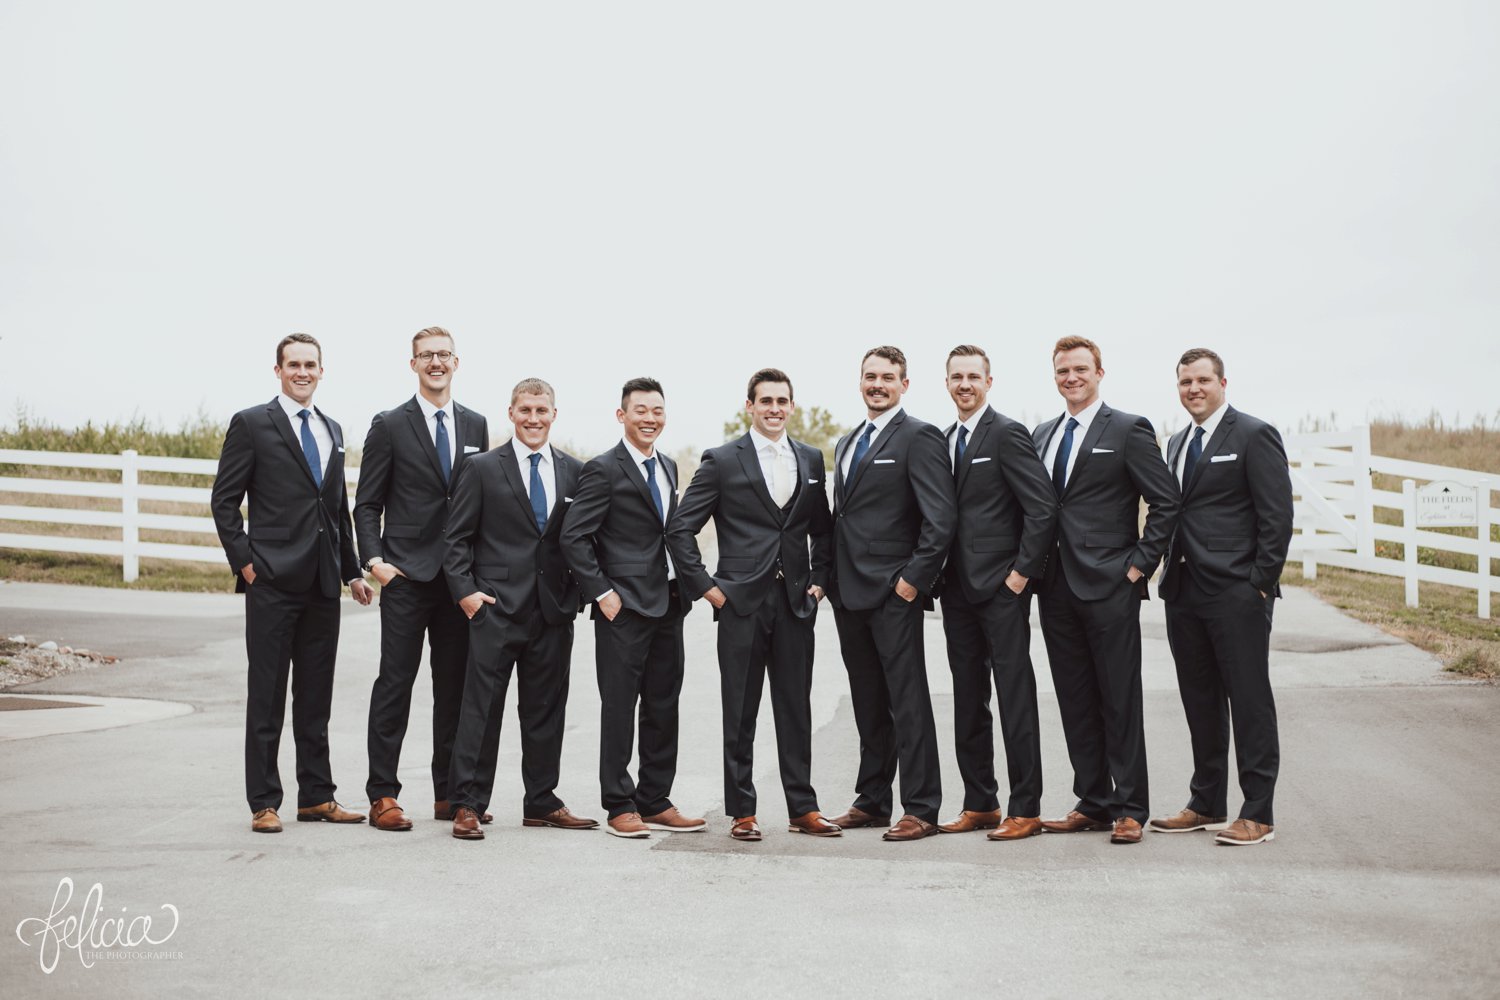 images by feliciathephotographer.com | destination wedding photographer | kansas city | eighteen ninety | classic | groomsmen portraits | walking | candid | cream tie | navy suit | royal blue | J. H. & sons clothier | brown leather shoes | country side | white picket fence | 